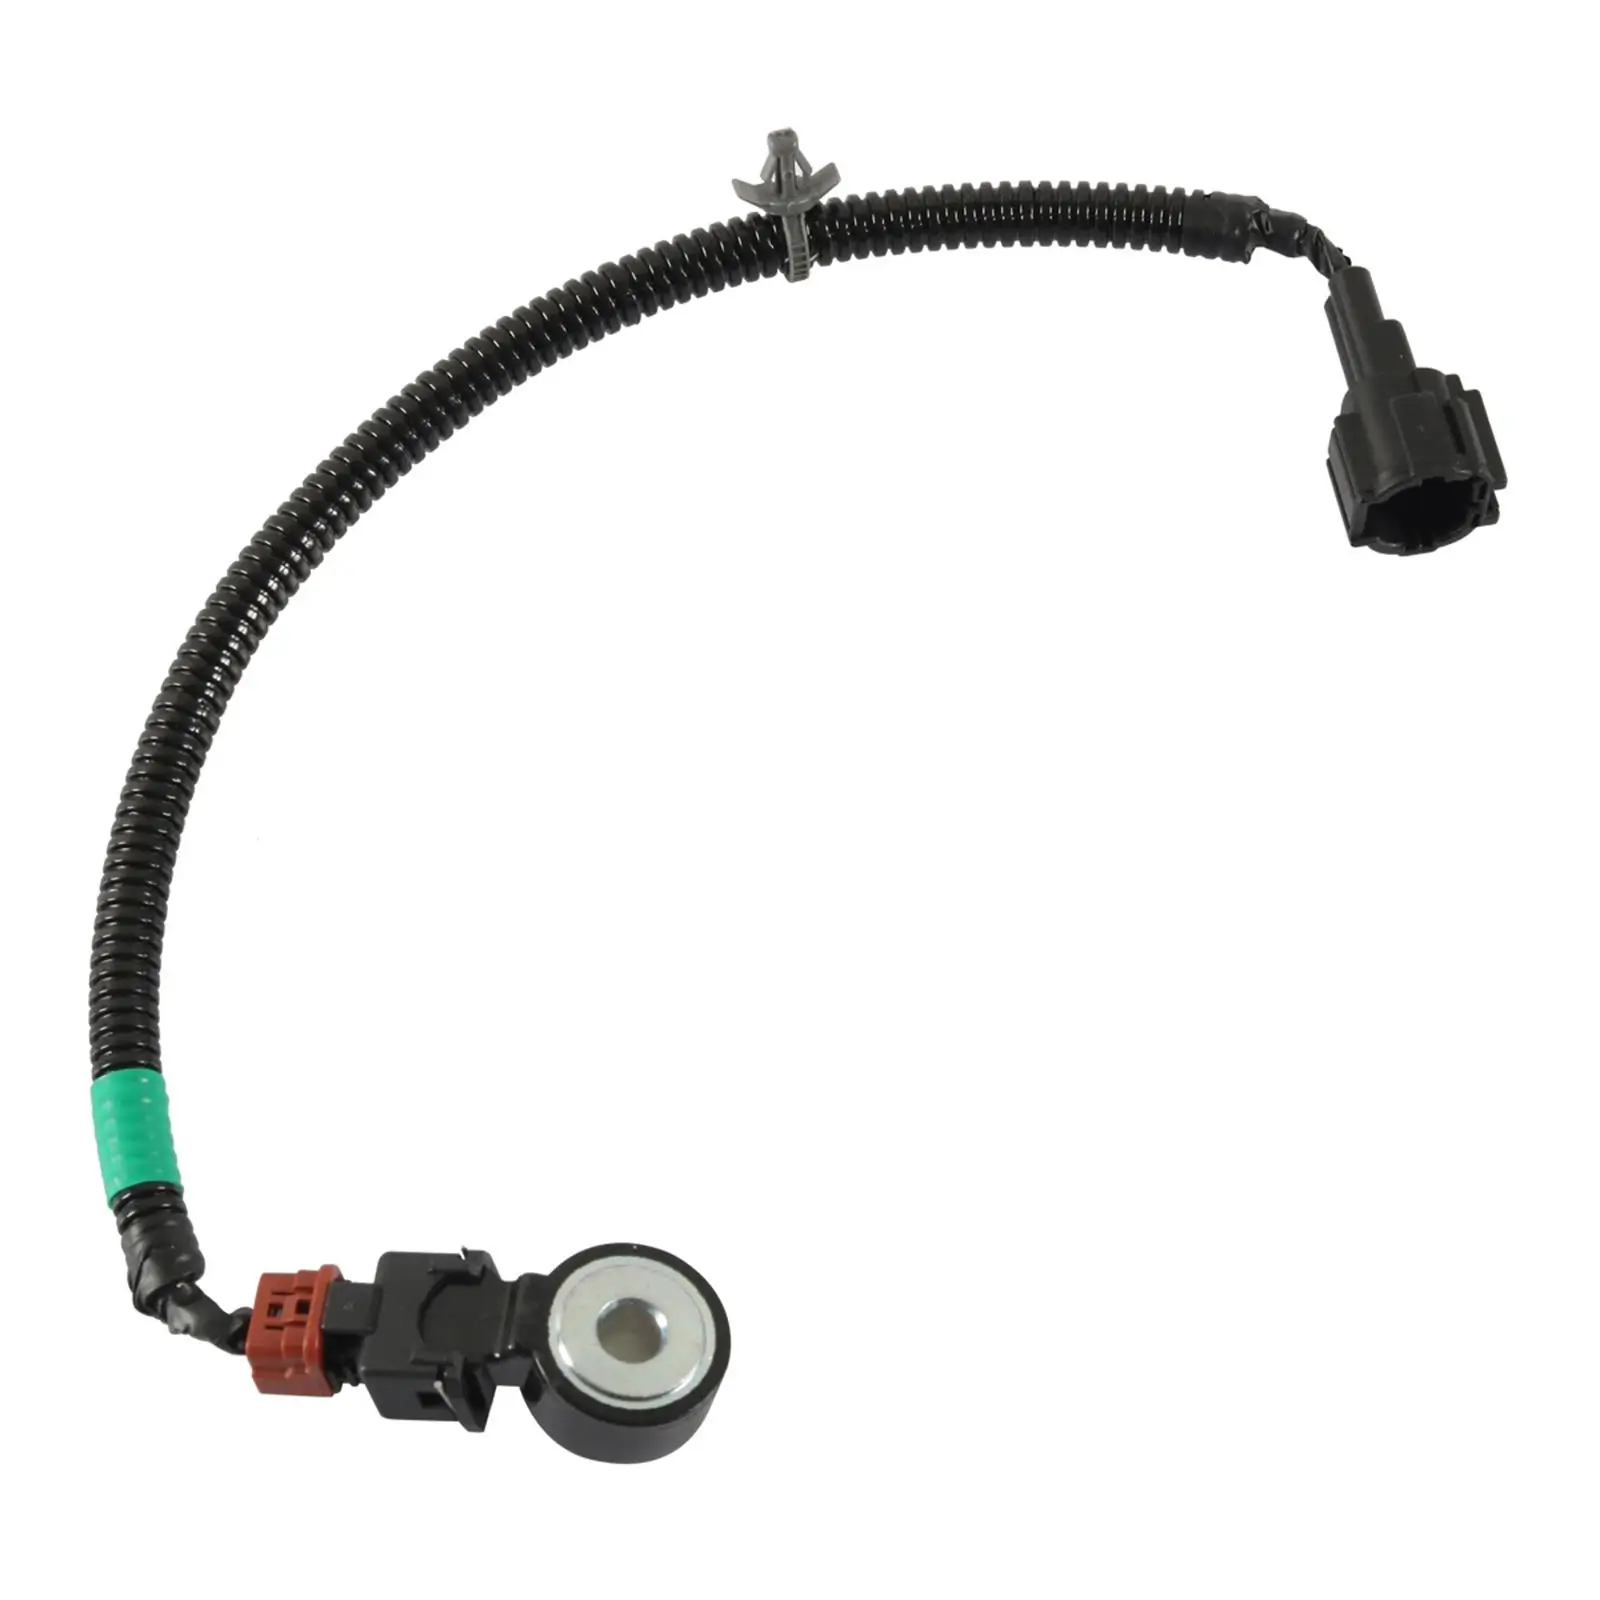 Engine Knock Sensor and Wire Harness 2407931U01 Fit for G20 Replace Parts Accessories